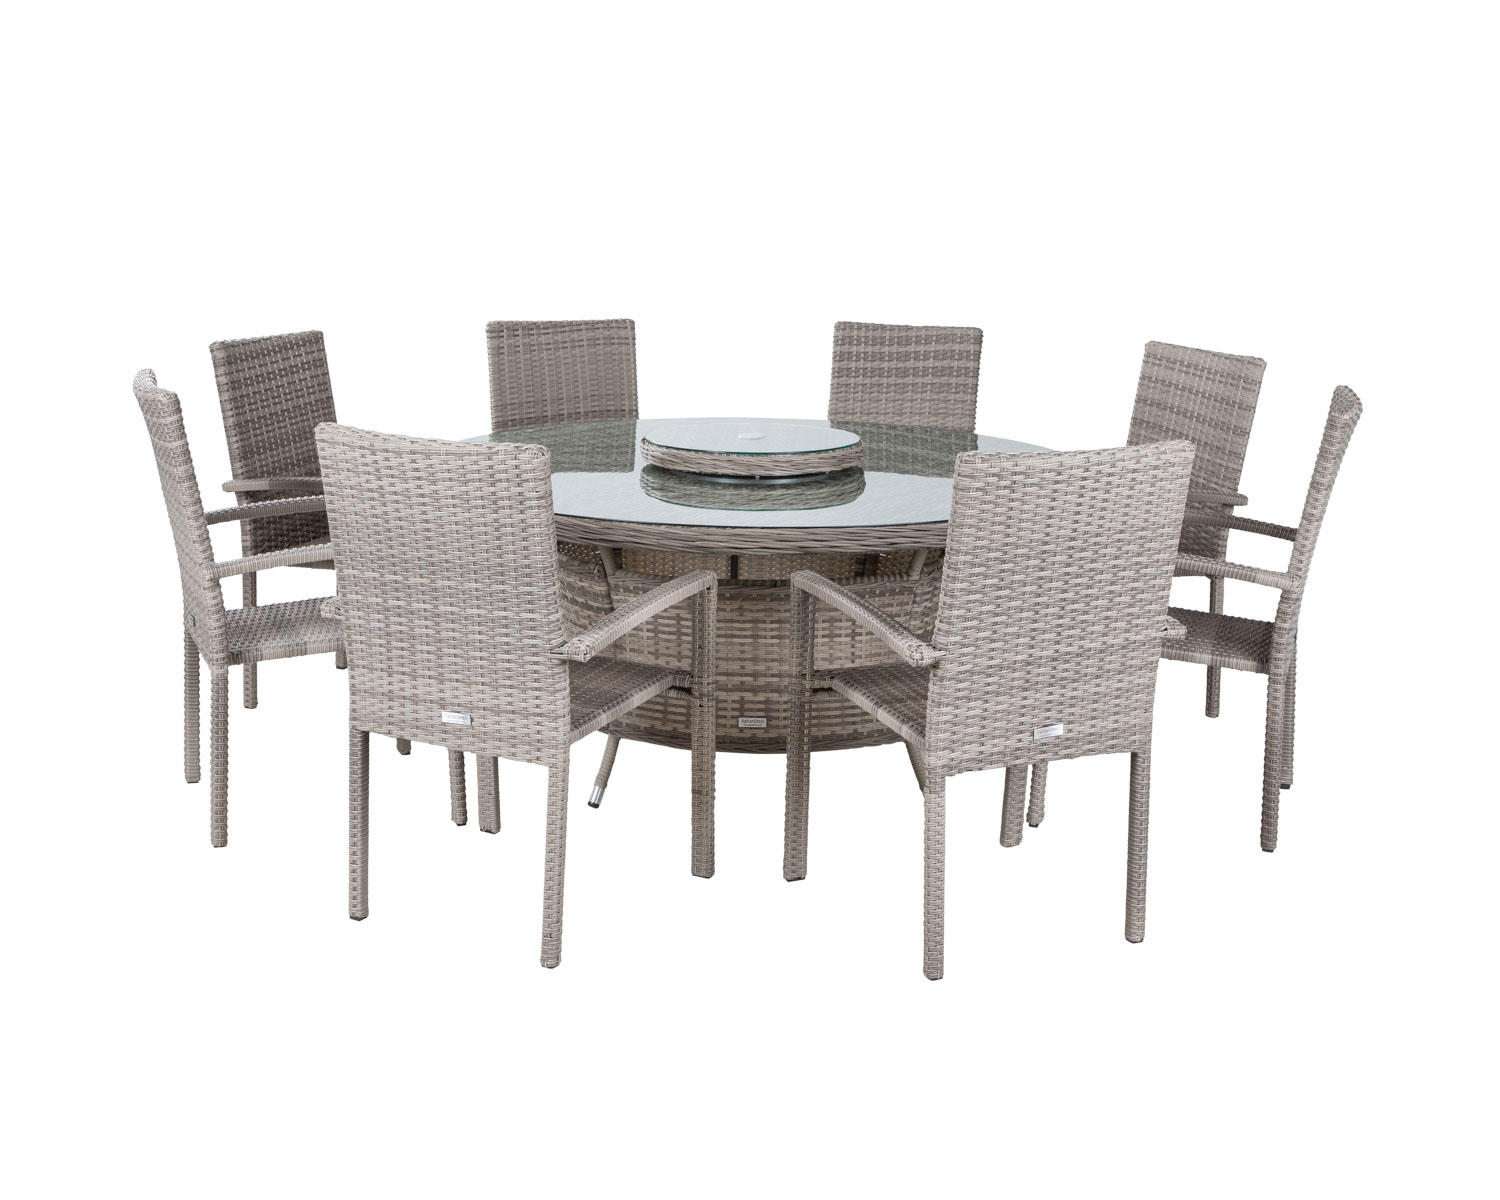 8 Seat Rattan Garden Dining Set With Large Round Table In Grey Rio Rattan Direct